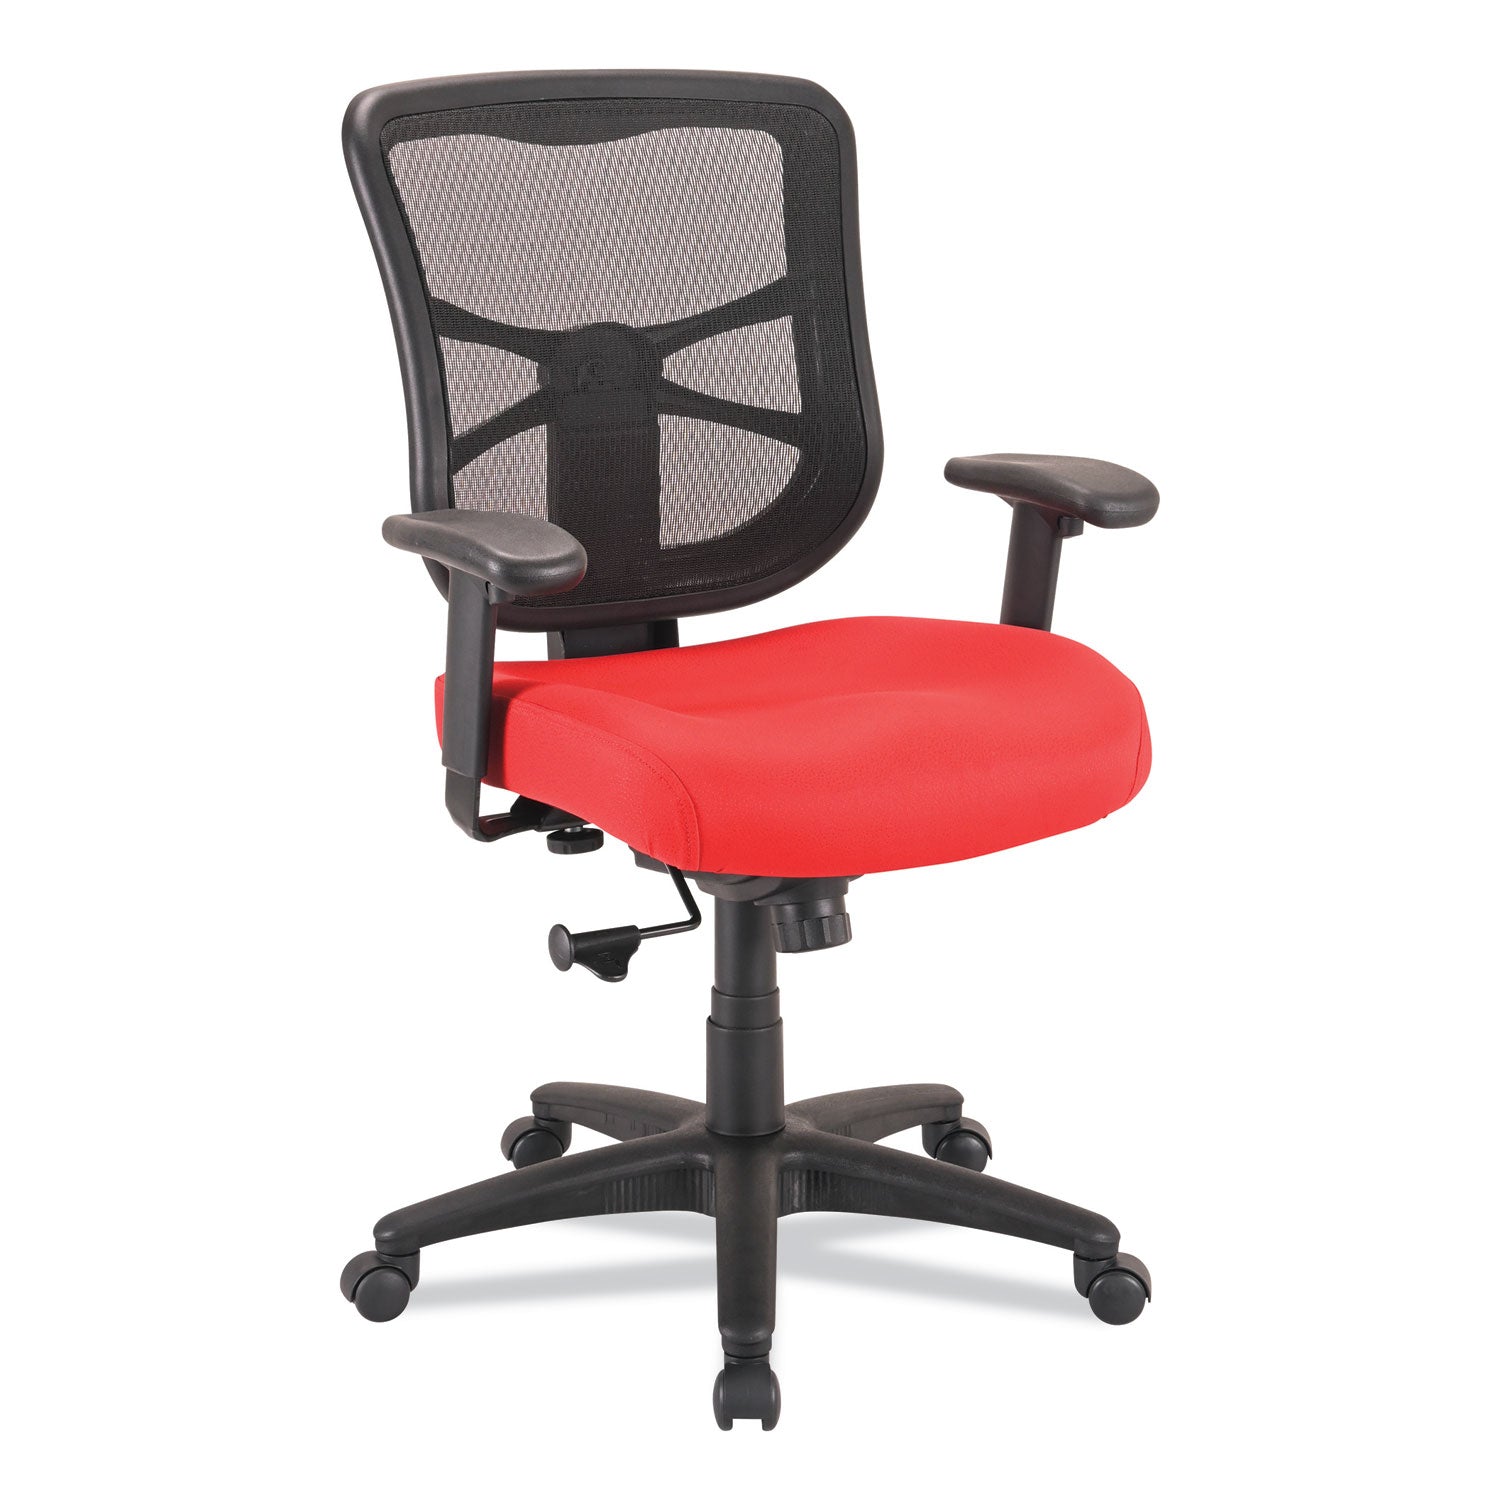 alera-elusion-series-mesh-mid-back-swivel-tilt-chair-supports-up-to-275-lb-179-to-218-seat-height-red_aleel42bme30b - 1